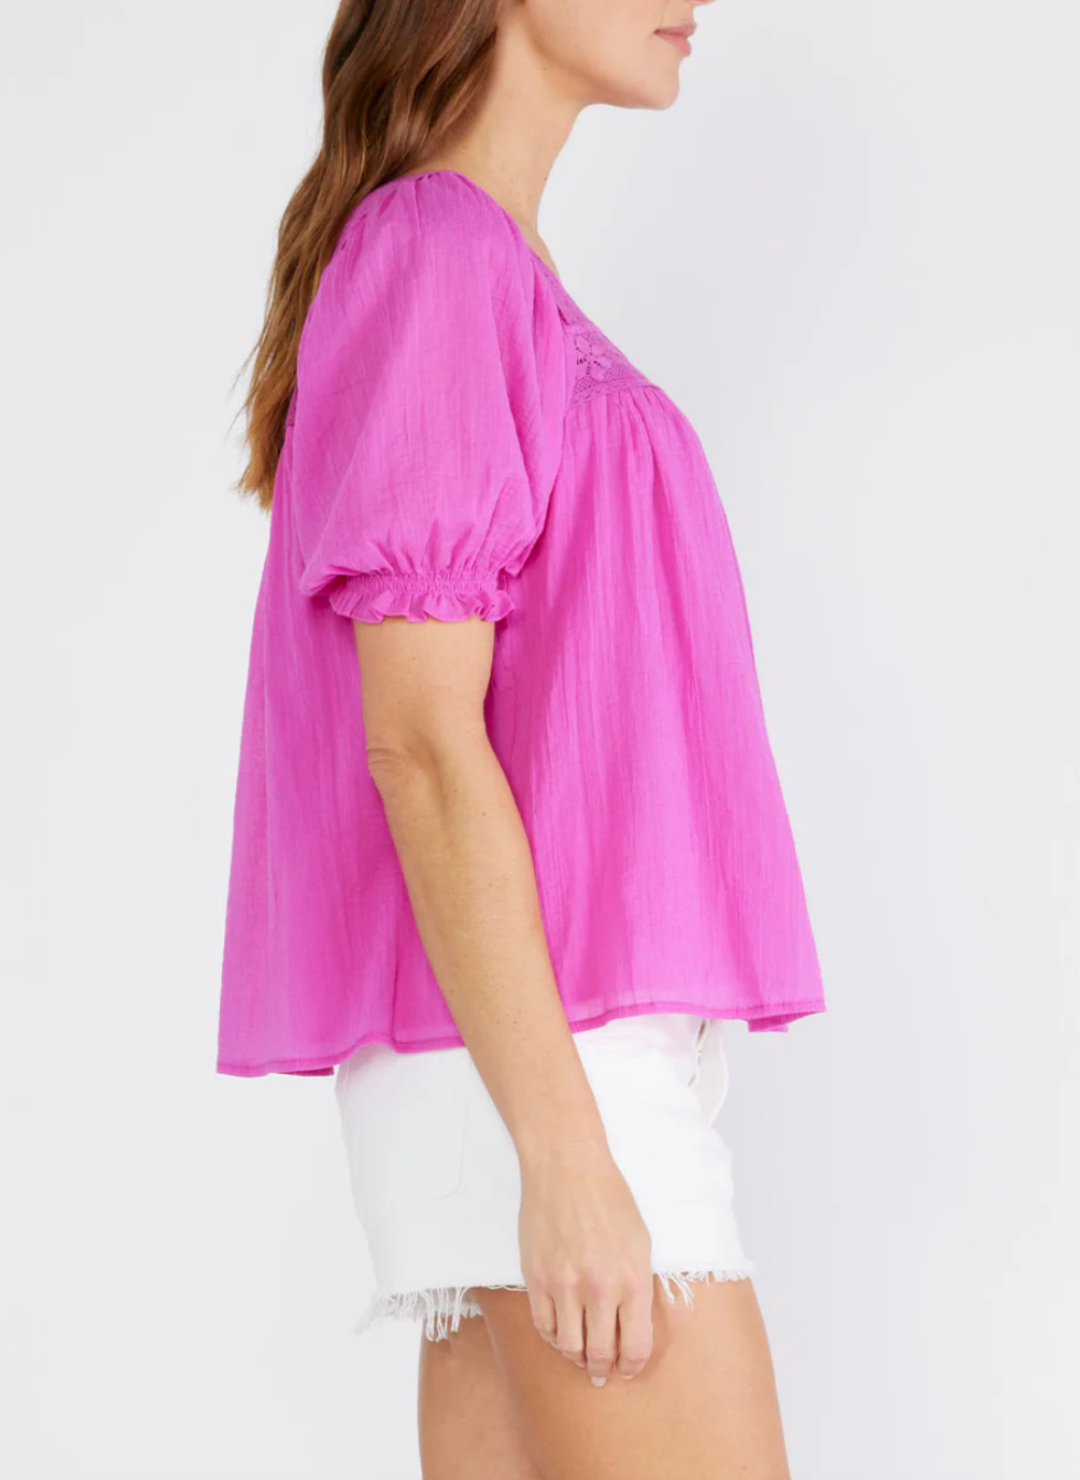 Side view of model wearing fuchsia LS  Perry Puff Sleeve Top with lace square neckline, slight puff in the half sleeve and a fully lined bodice styled with white shorts.